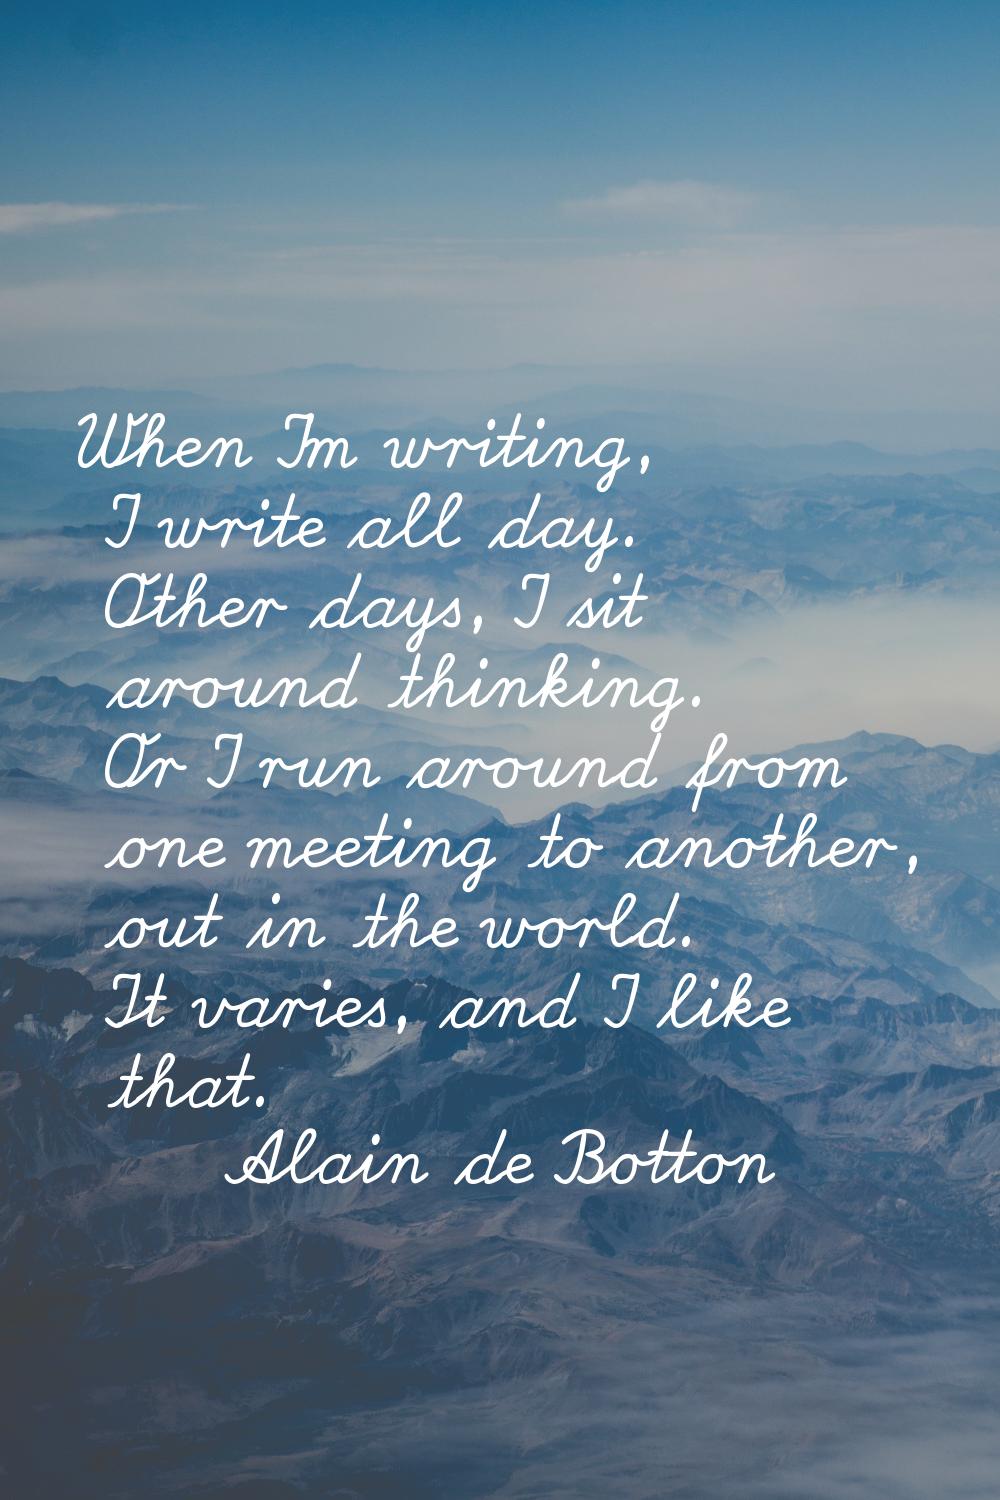 When I'm writing, I write all day. Other days, I sit around thinking. Or I run around from one meet